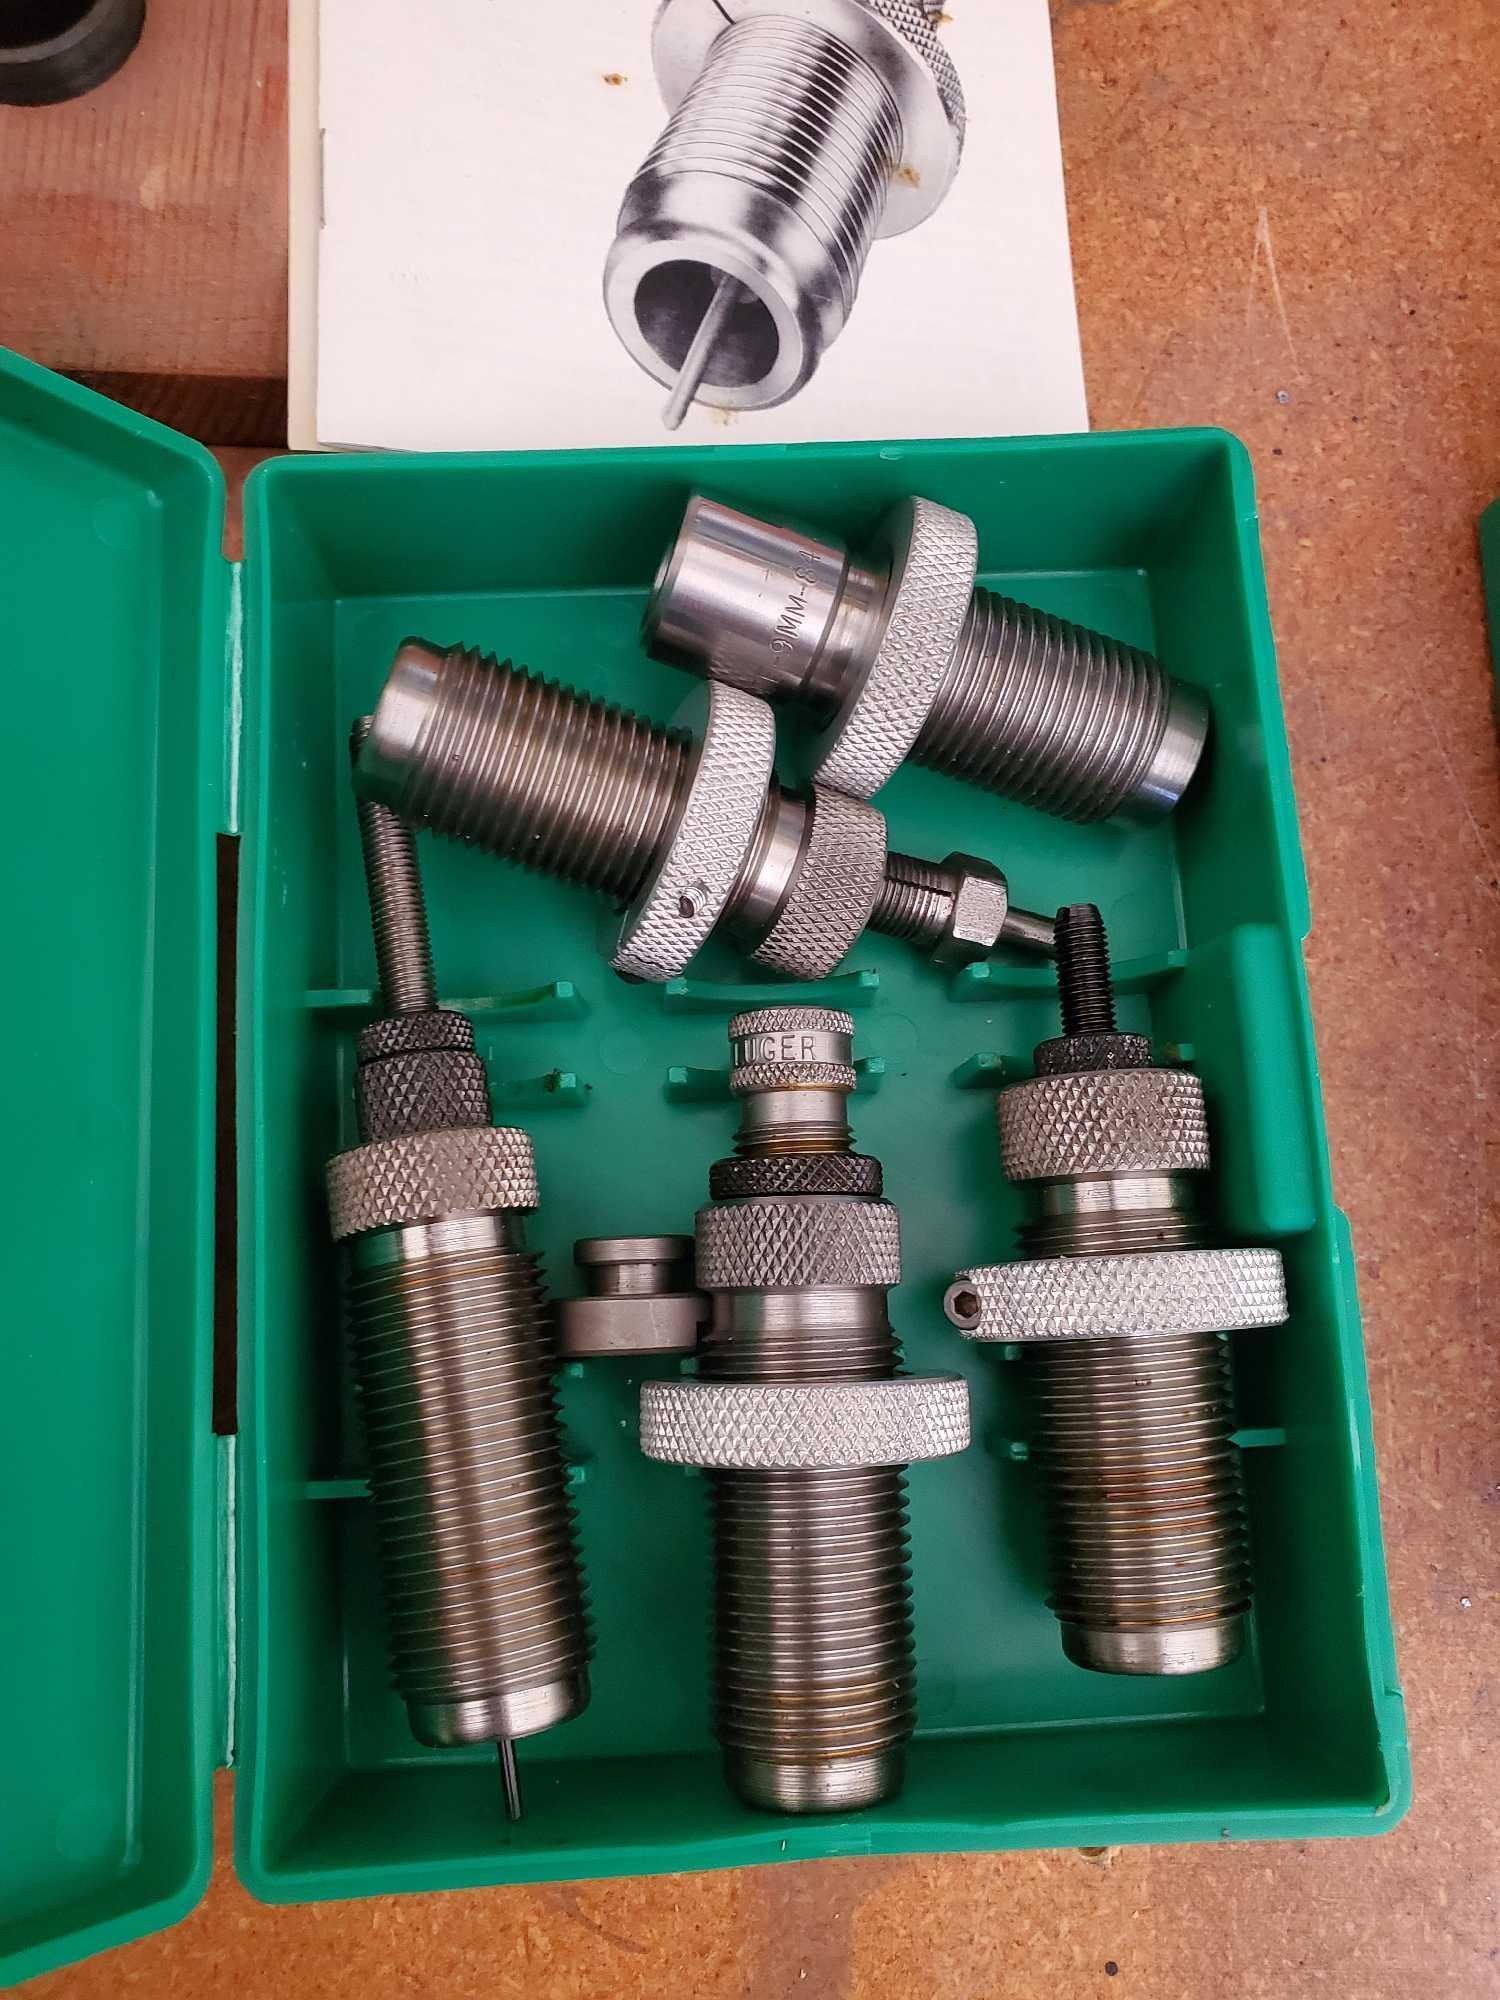 6 RCBS RELOADING DIES AND KINETEC PULLER